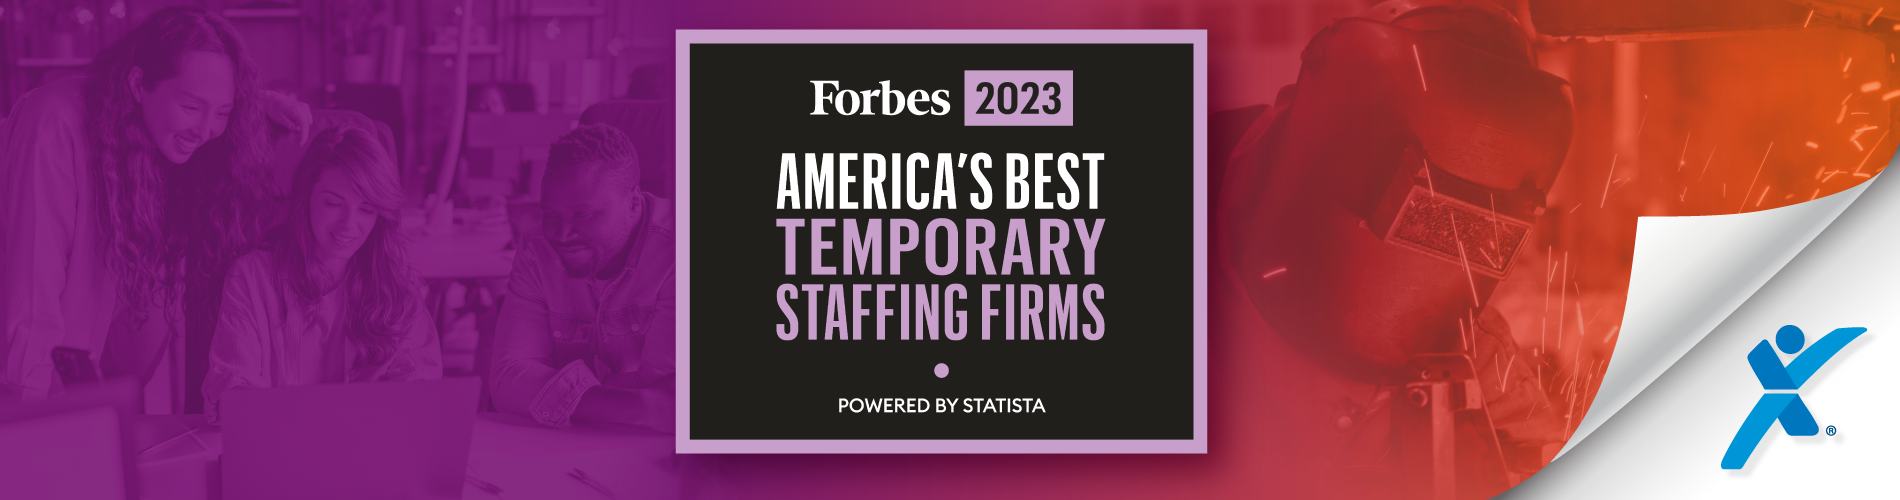 Forbes Best Temp Staffing 2023